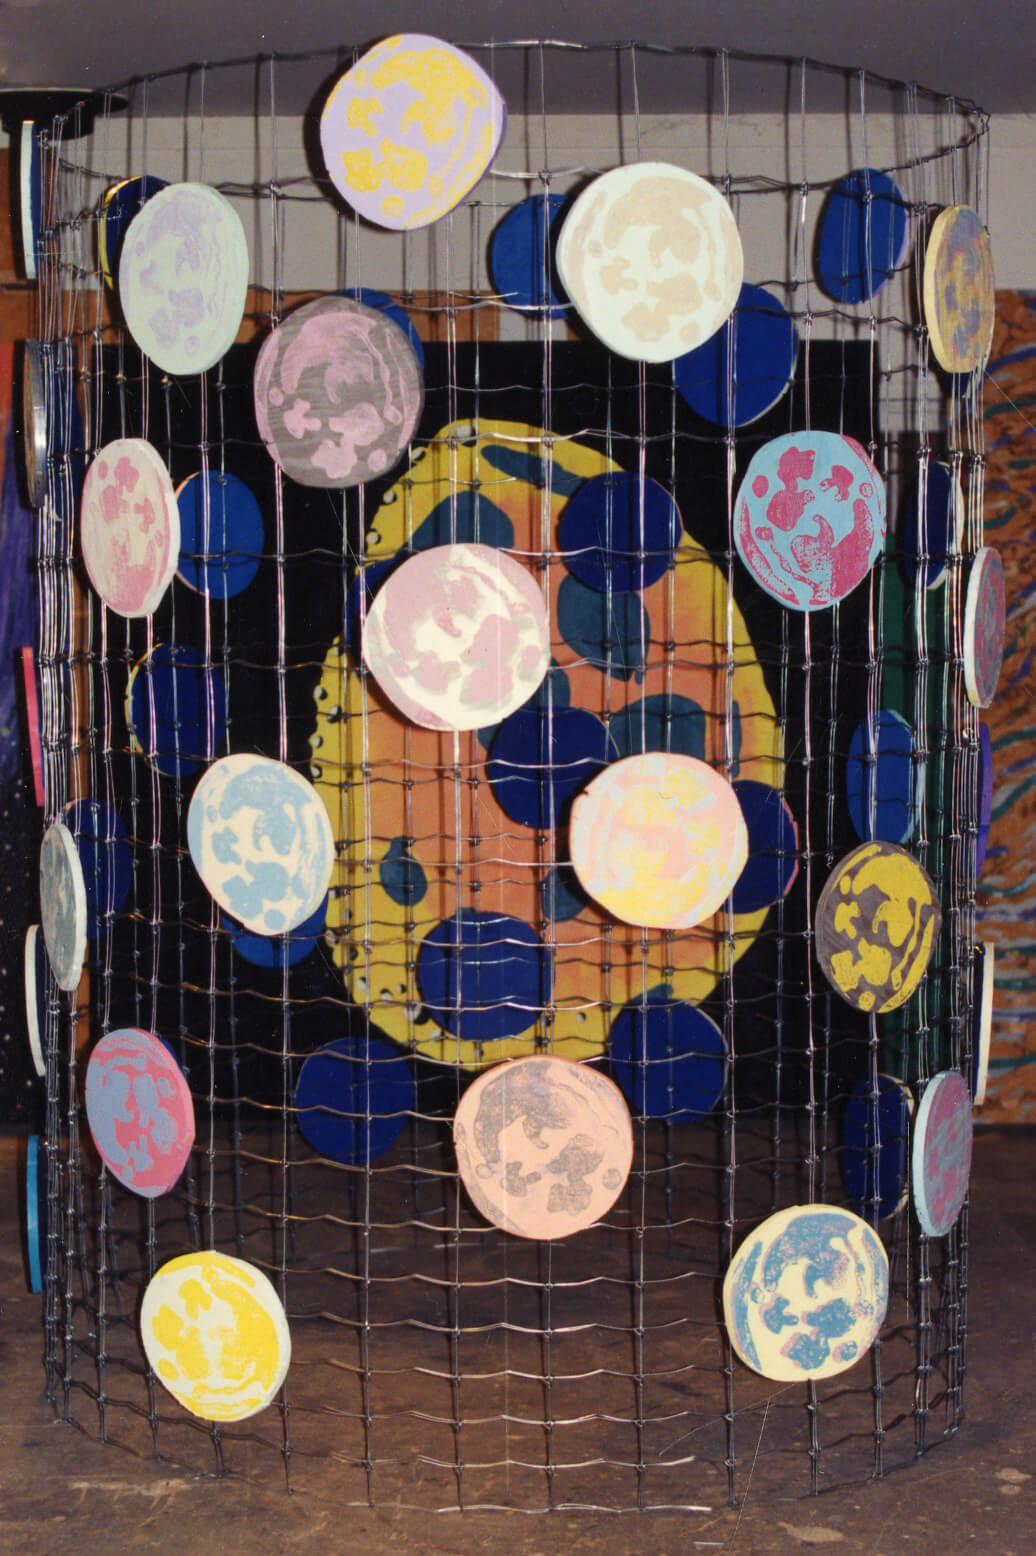 Many Moons II, 1994, by Paterson Ewen